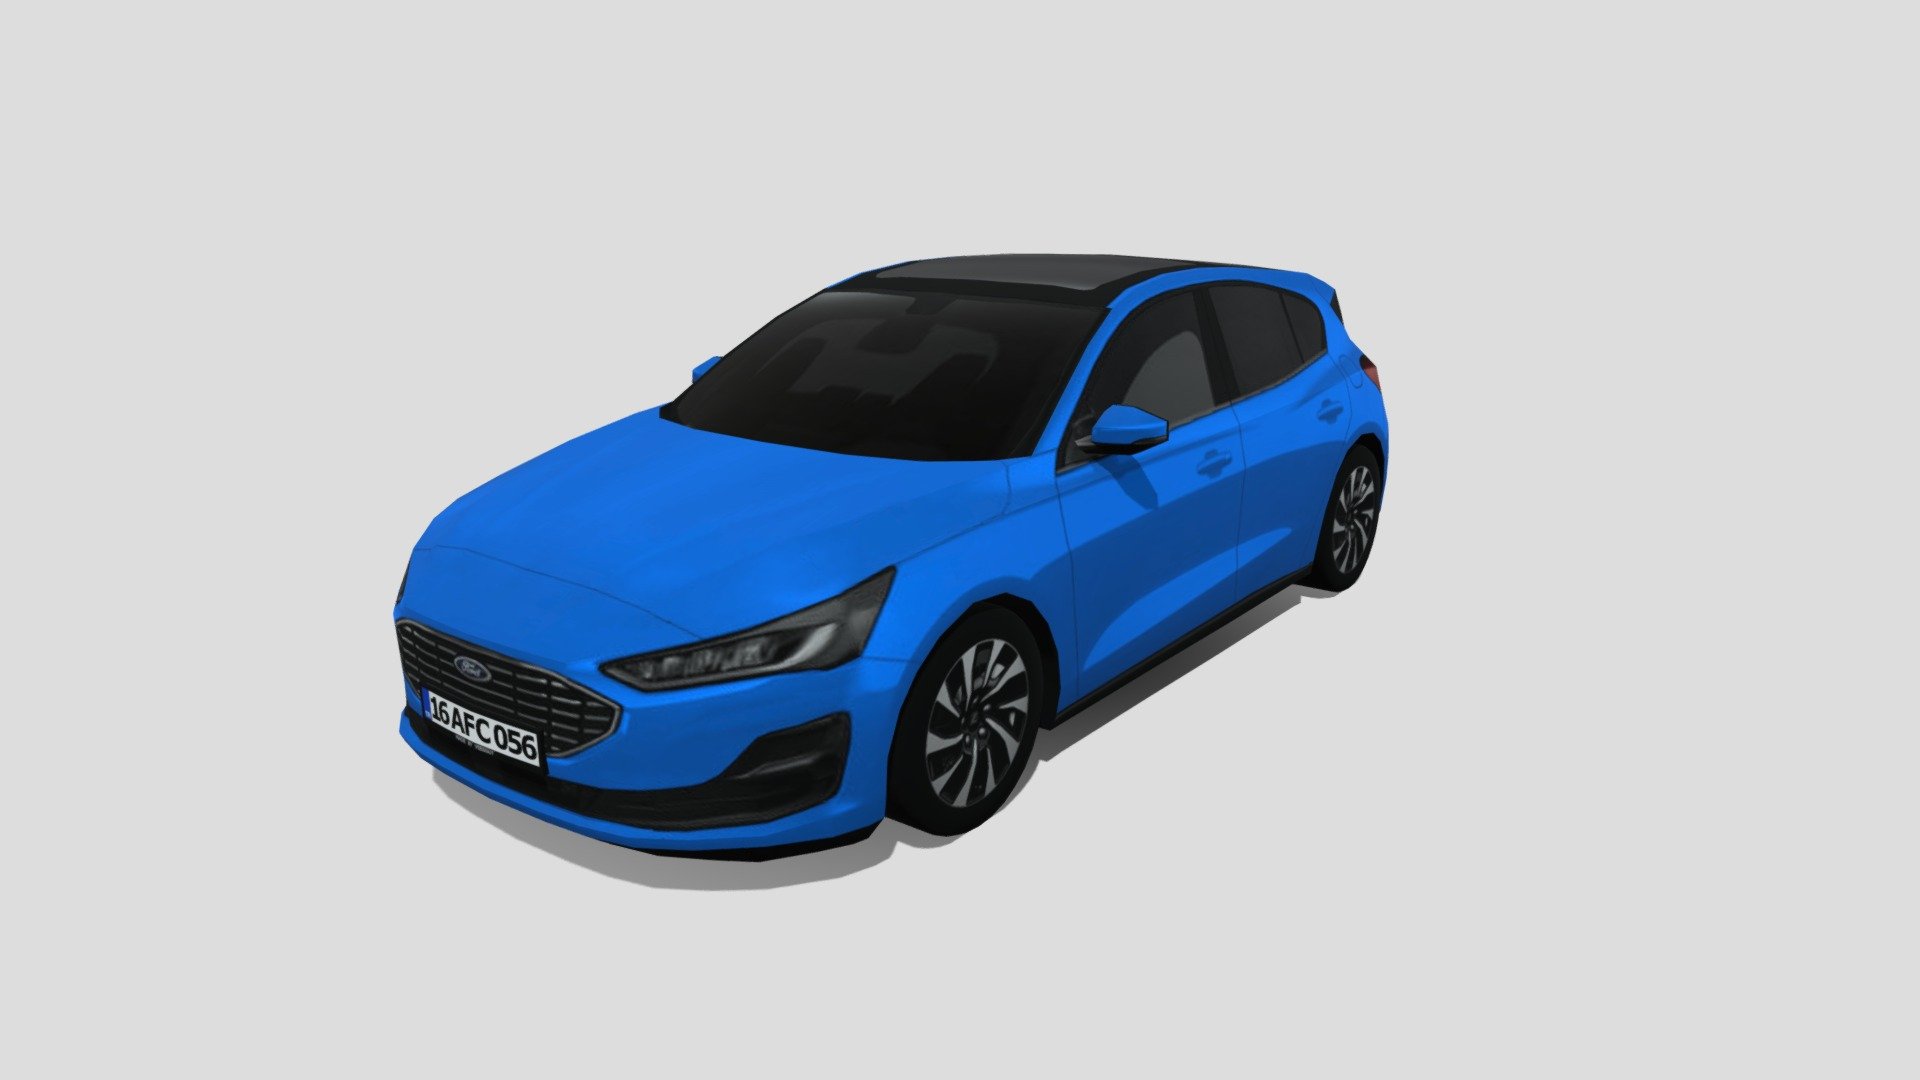 2022 Ford Focus by VeesGuy

Tris: 3116
Texture: 1024x1024 - 2022 Ford Focus - 3D model by VeesGuy 3d model